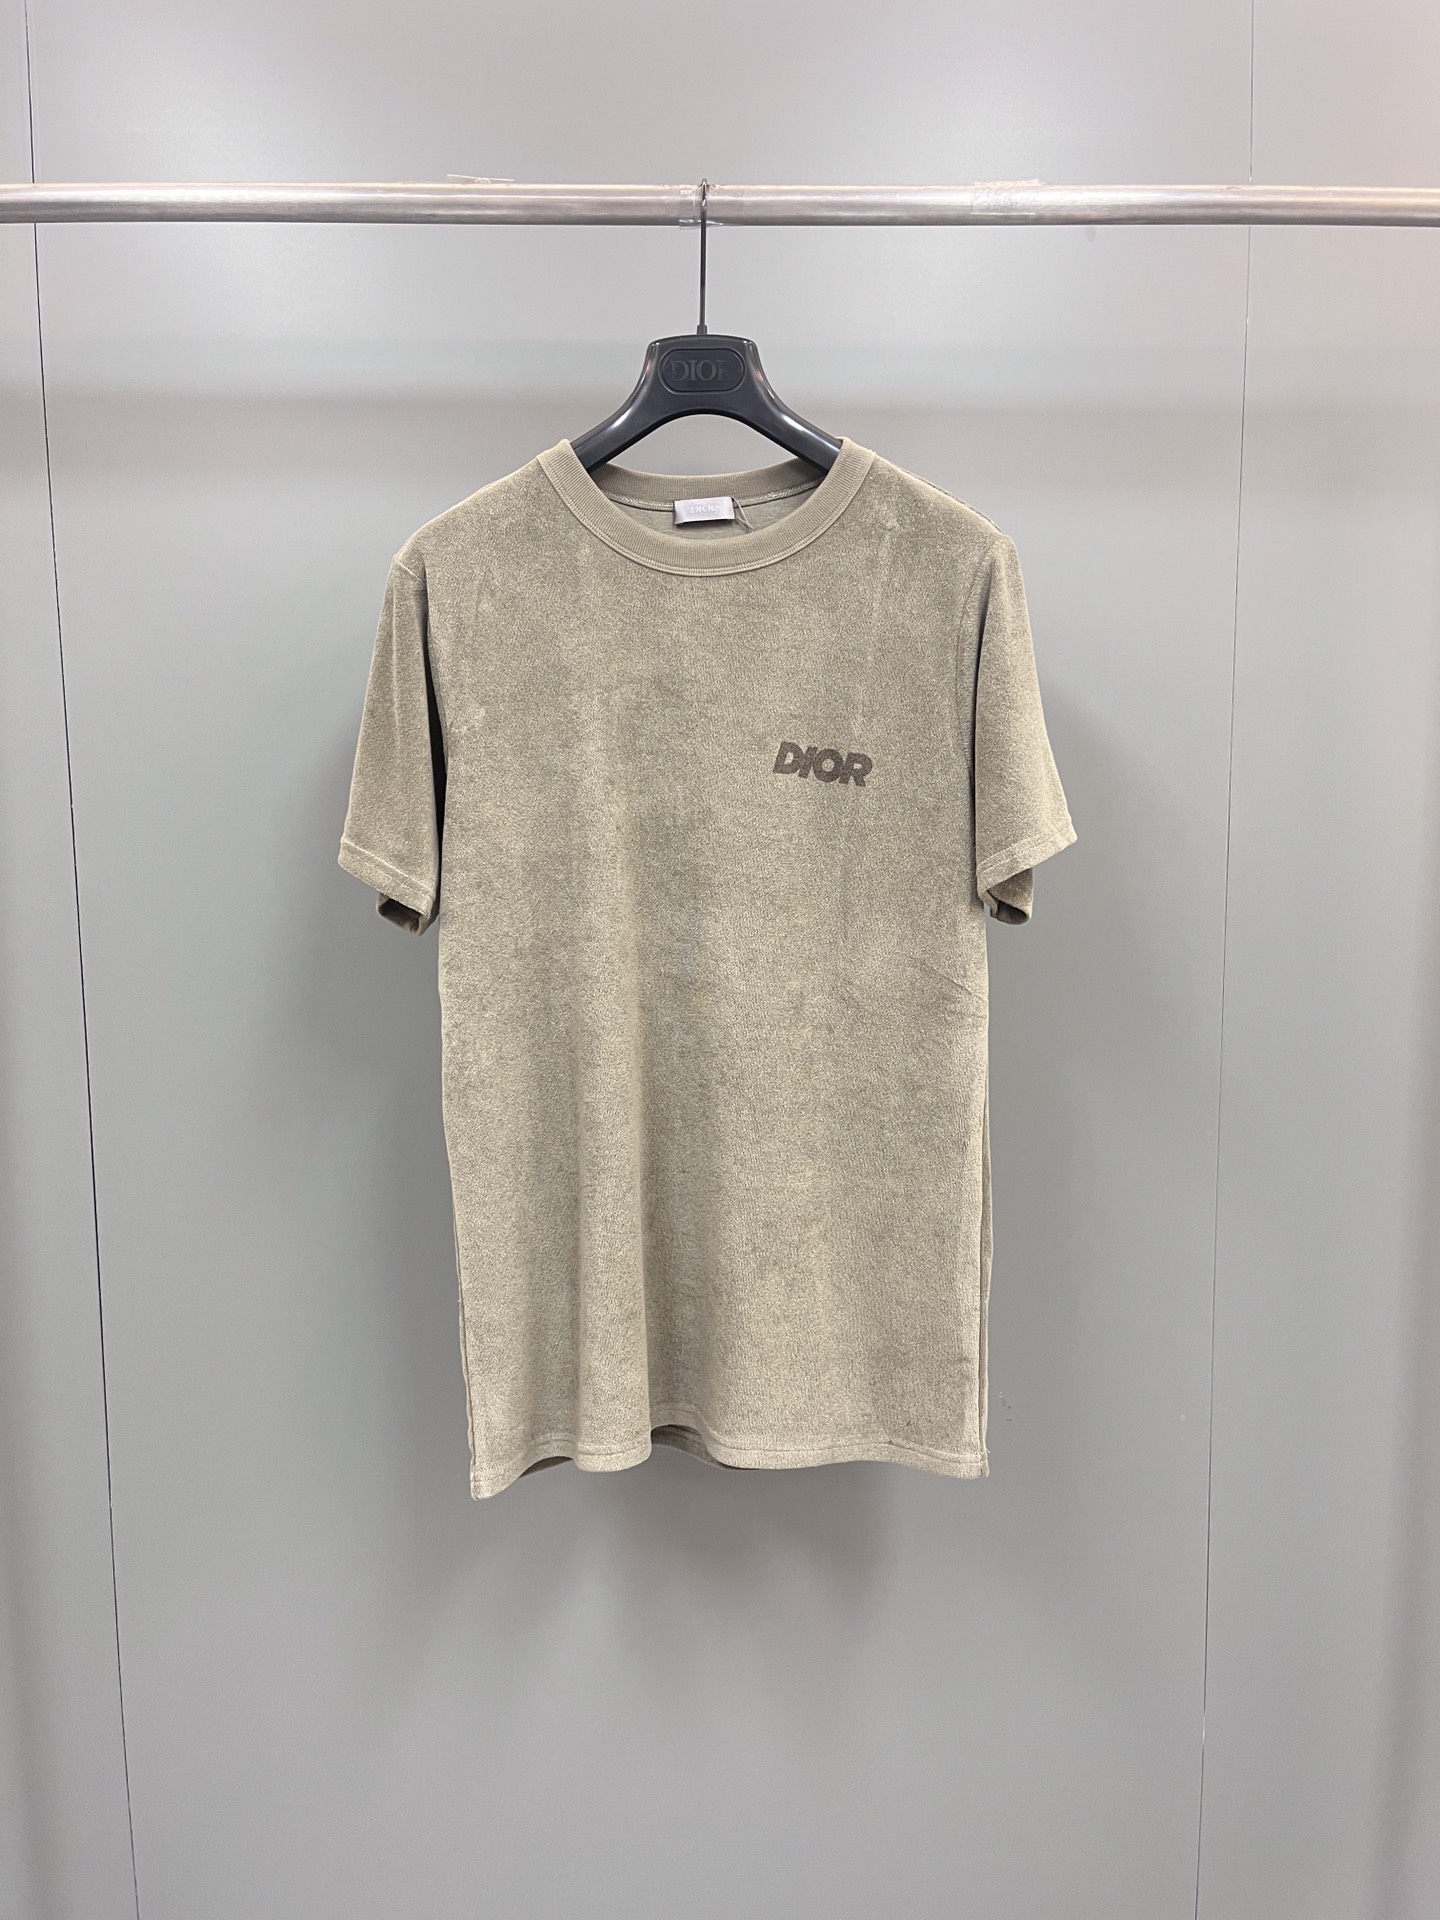 Dior Clothing T-Shirt Beige Blue Grey Printing Unisex Cotton Spring/Summer Collection Beach